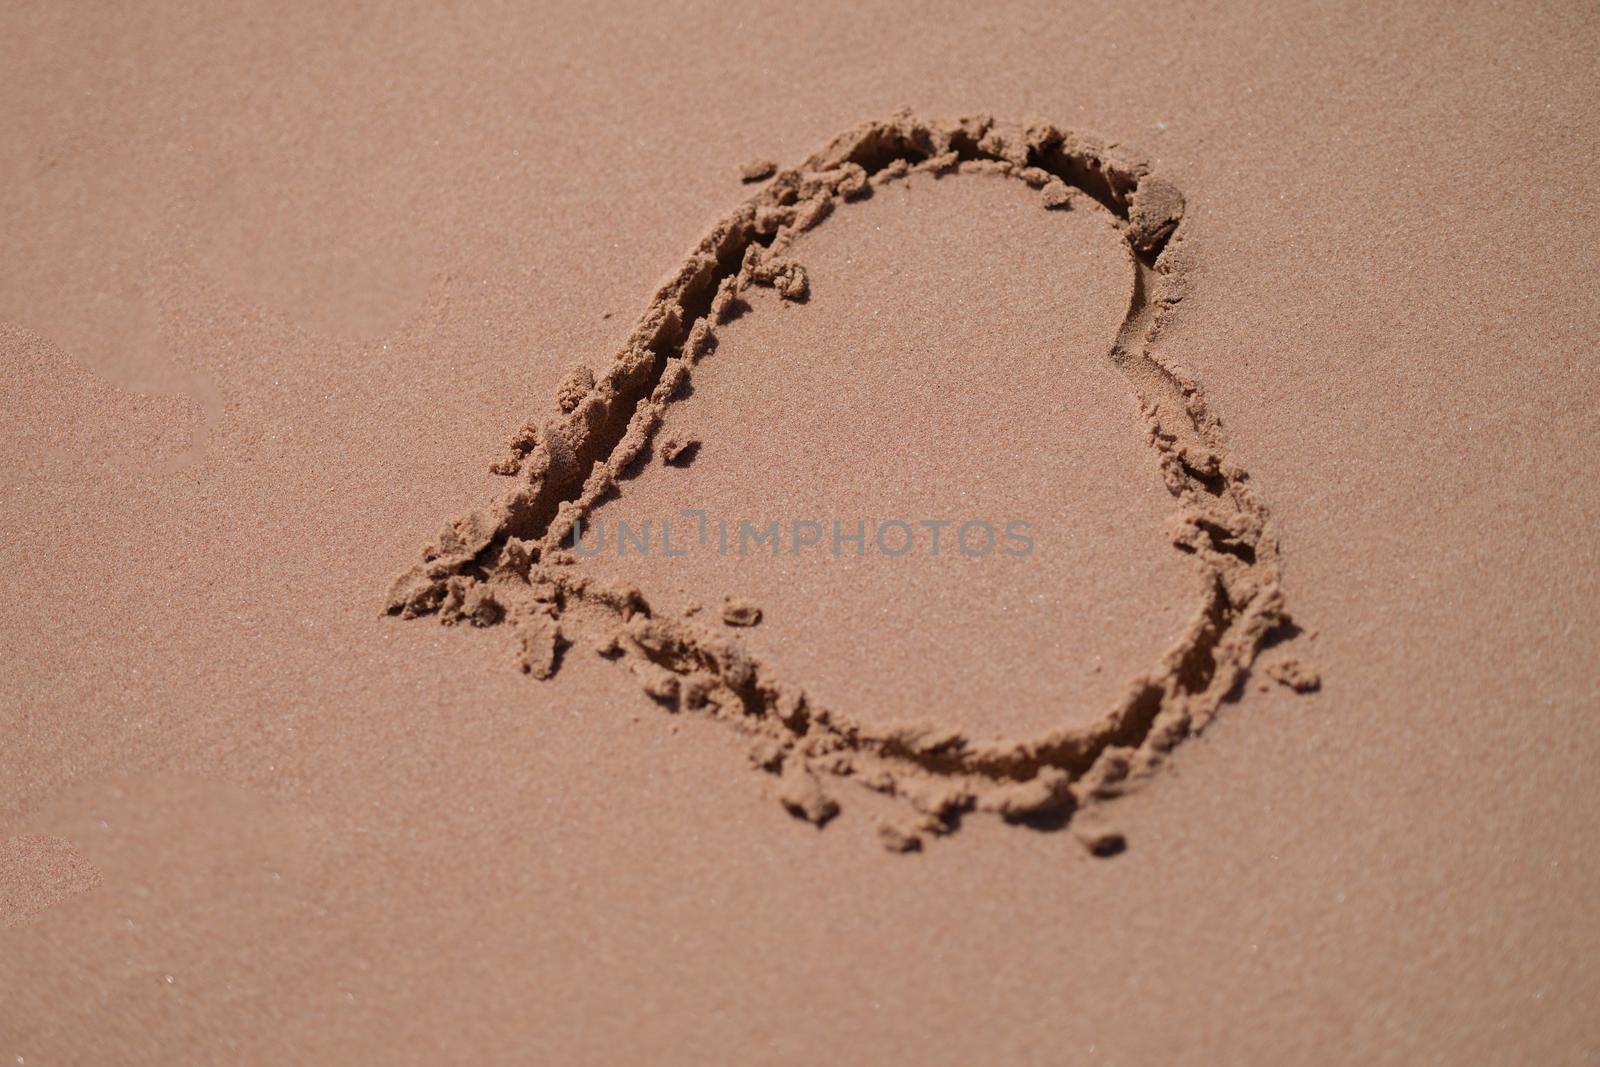 Drawn heart on wet sand on beach. Love for sea travel concept